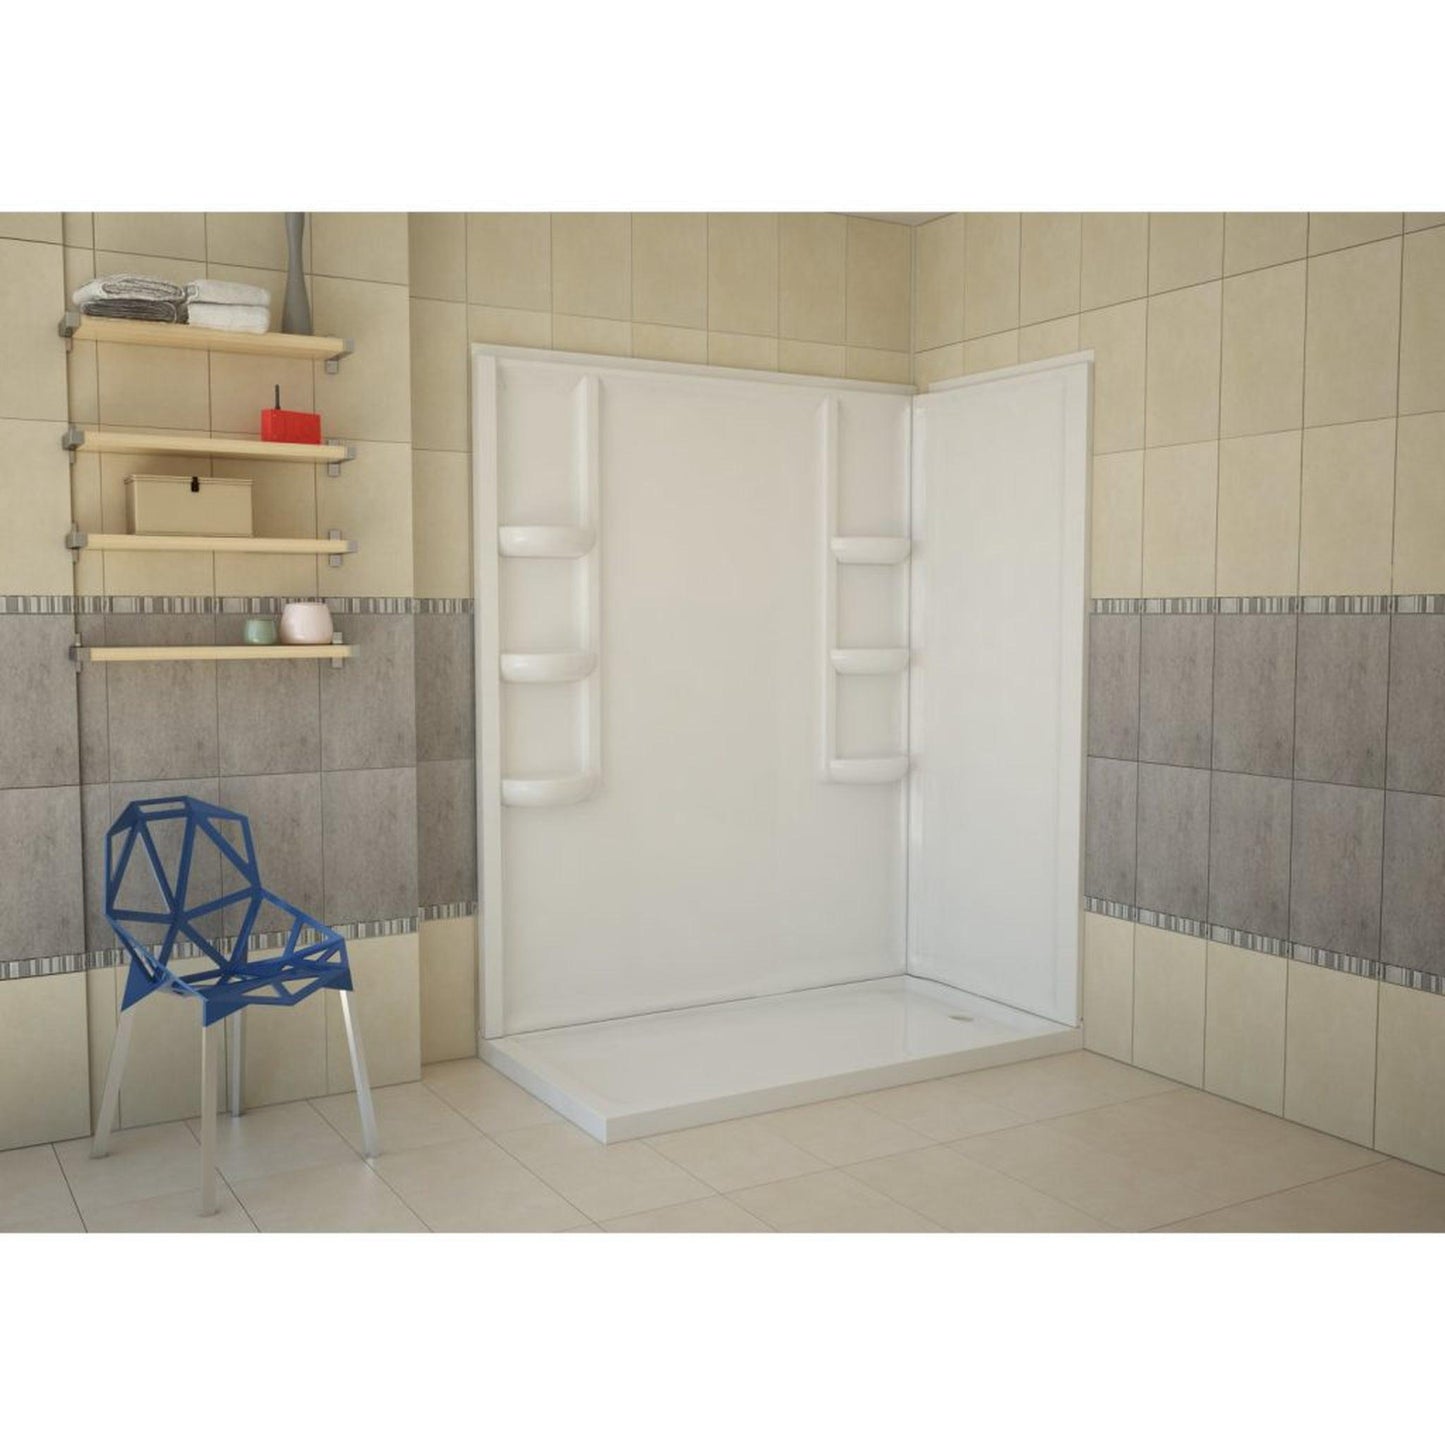 ANZZI Vasu Series 60" x 36" x 74" White Acrylic Corner Two Piece Shower Wall System With 6 Built-in Shelves